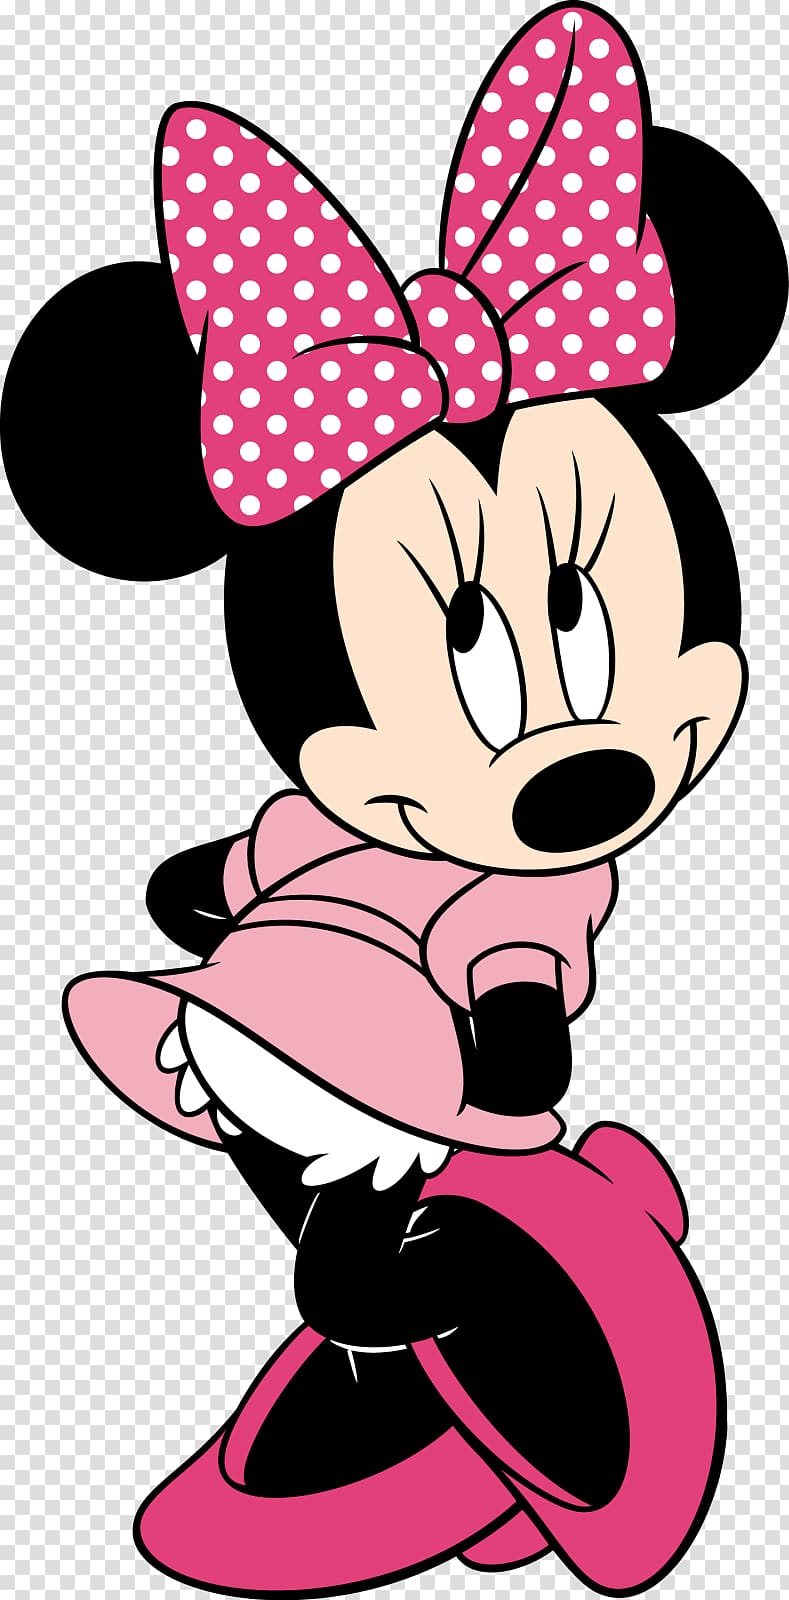 Minnie Mouse illustration, Minnie Mouse Mickey Mouse , Minnie Mouse  transparent background PNG clipart | HiClipart